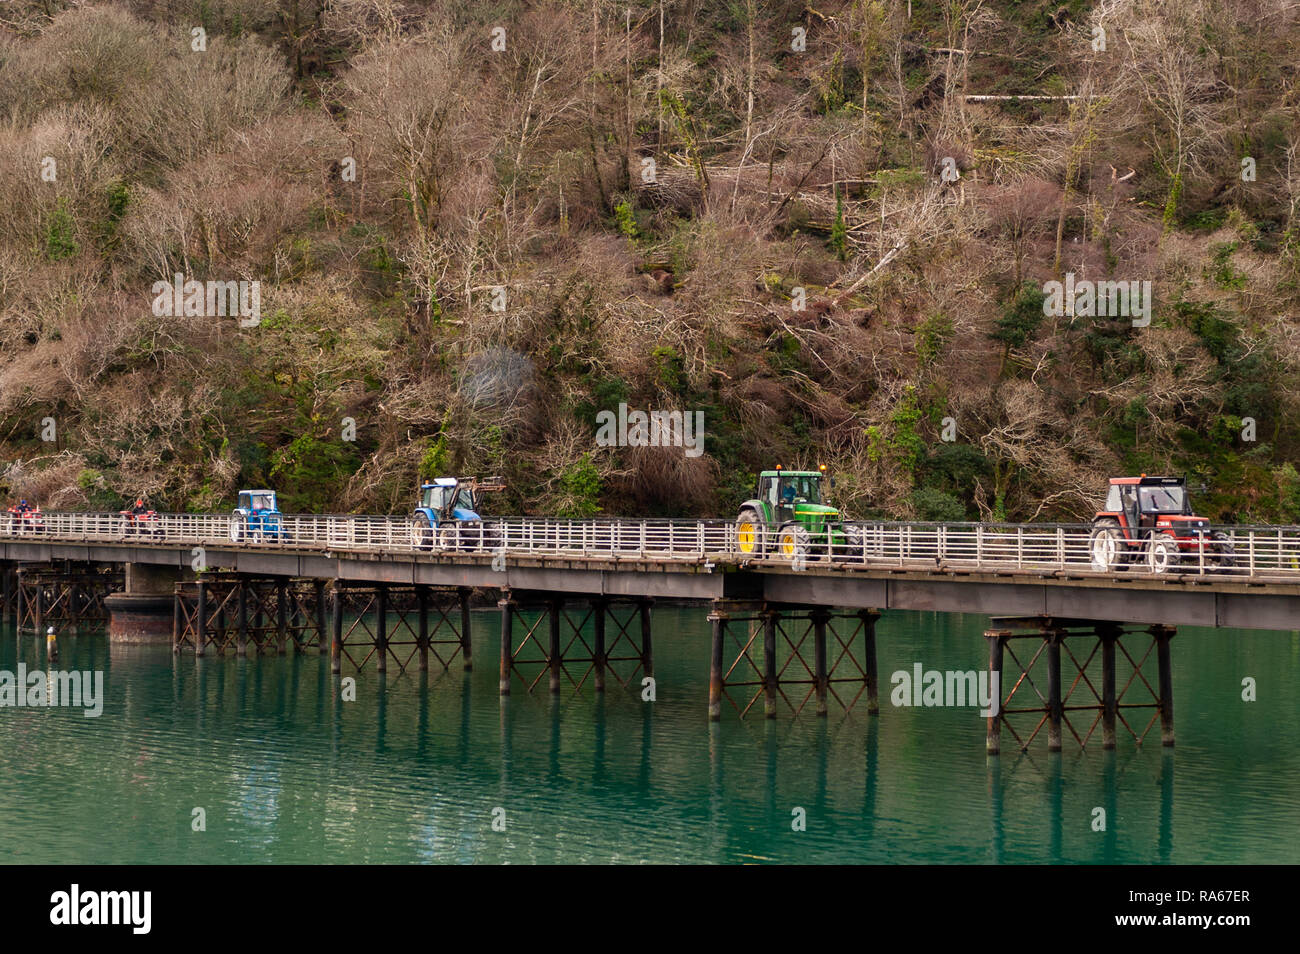 Glandore, West Cork, Ireland. 1st Jan, 2019. Leap and District Vintage Club held a New Year's Day tractor and car run in aid of the Glandore National School Building Fund earlier today. Over 60 tractors and cars signed on for the run. The tractors crossed the famous Union Hall bridge during the run. Credit: Andy Gibson/Alamy Live News. Stock Photo